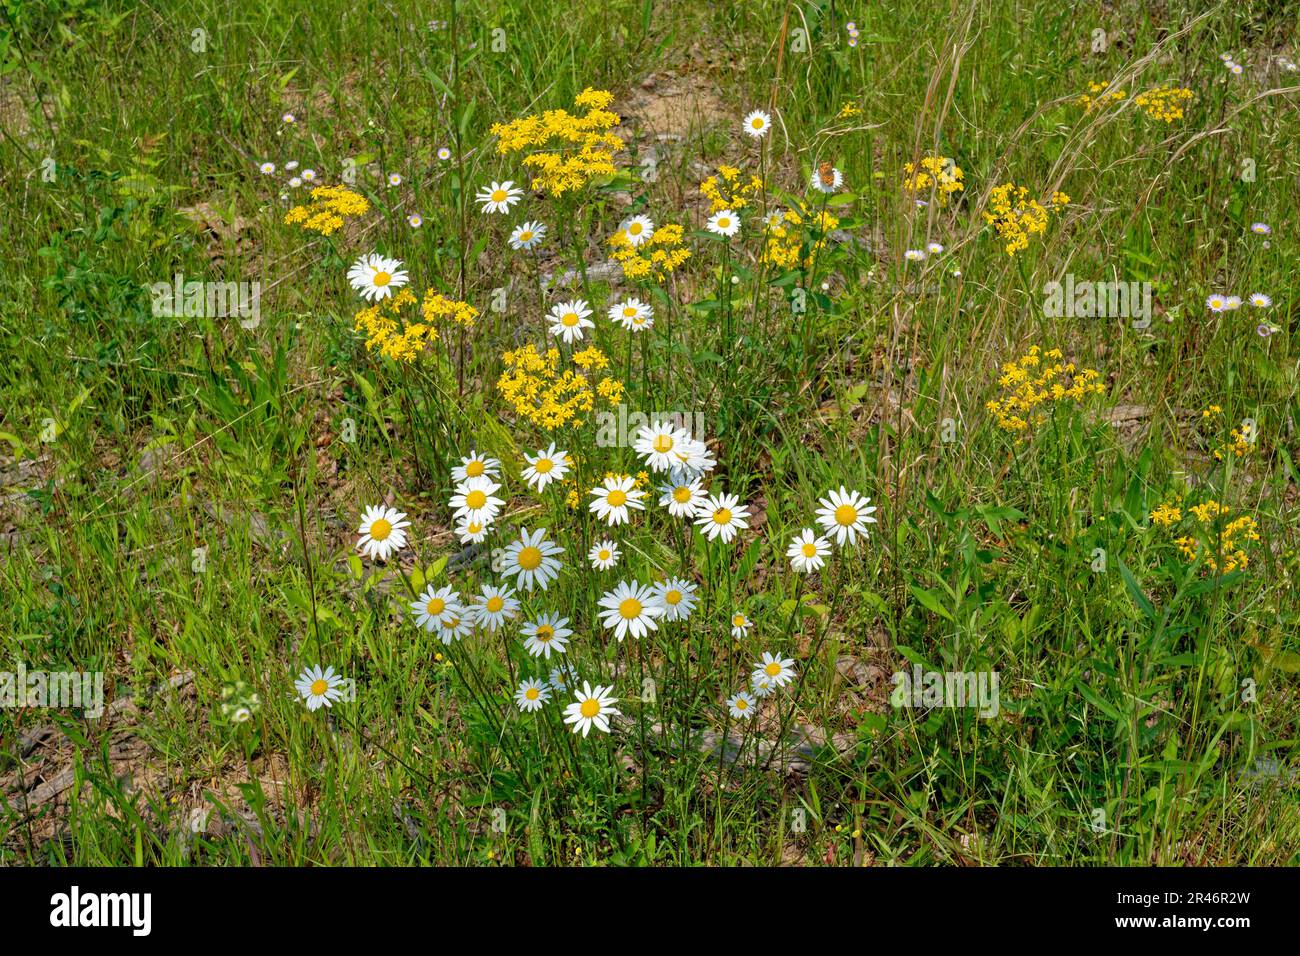 White daisies and yellow butterweed in bloom with tall grasses and a small butterfly and flying insects on the open flowers in a field on a sunny day Stock Photo